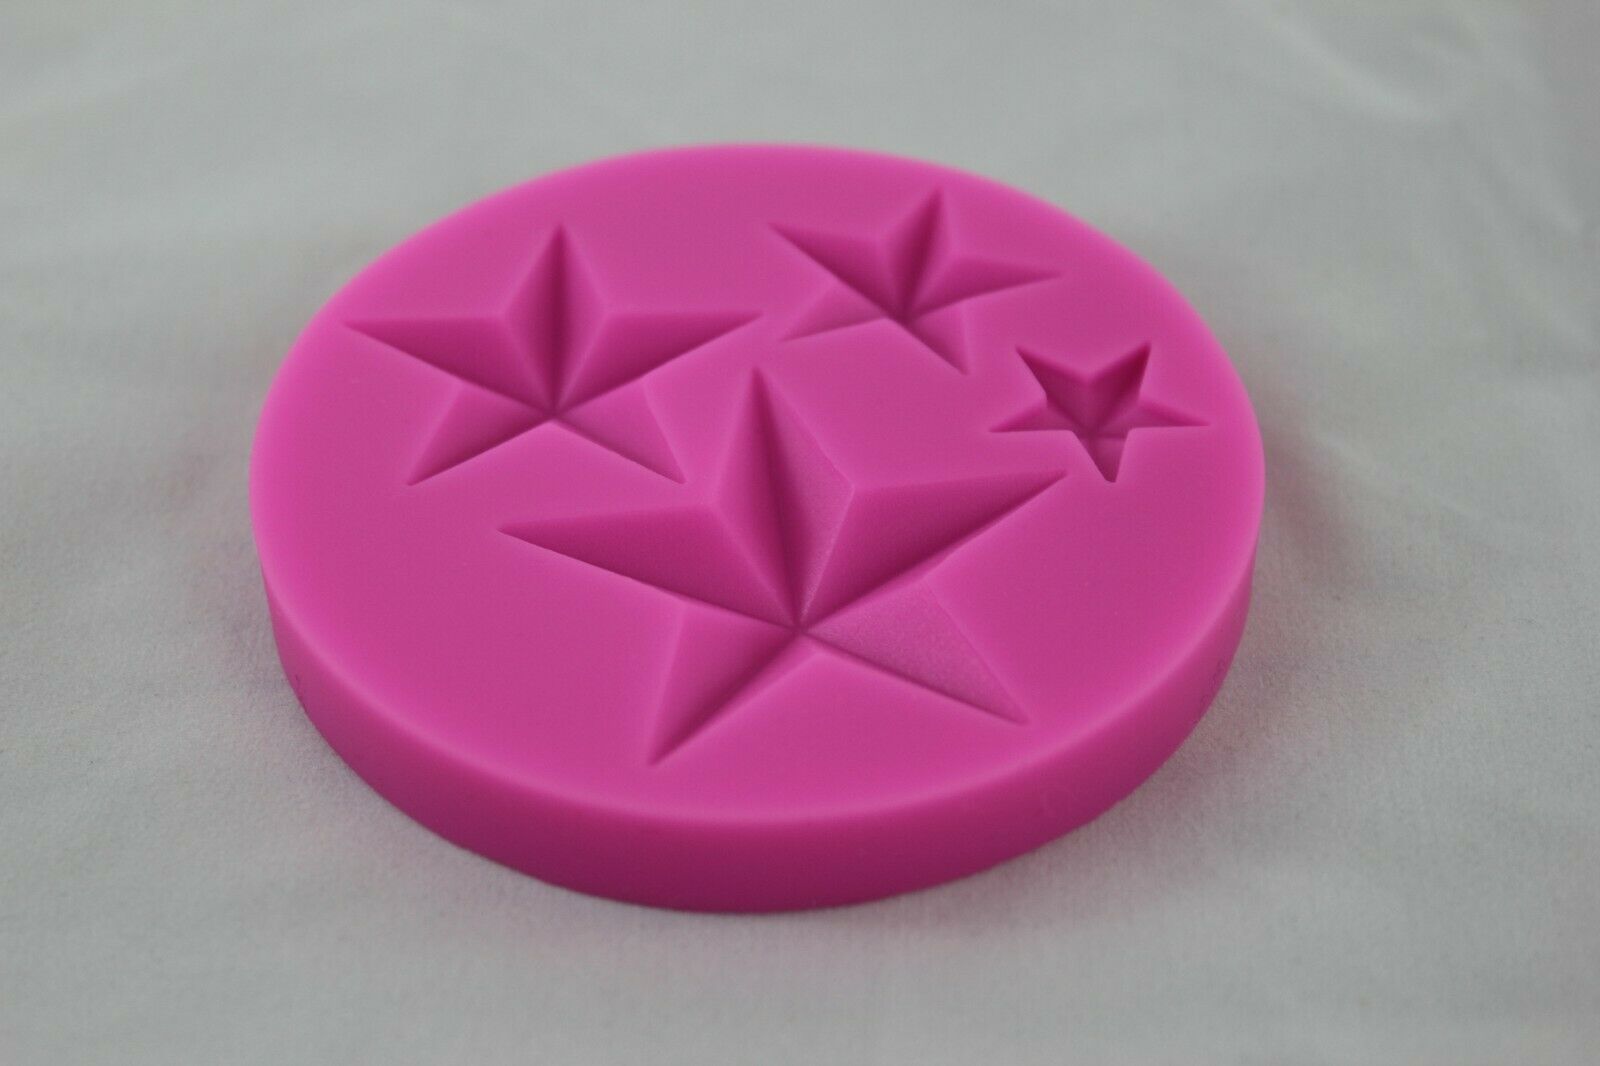 attachment-https://www.cupcakeaddicts.co.uk/wp-content/uploads/imported/5/Star-shapes-Silicone-mould-sugarcraft-baking-cake-decorating-fondant-chocolate-323779810625-2.jpg